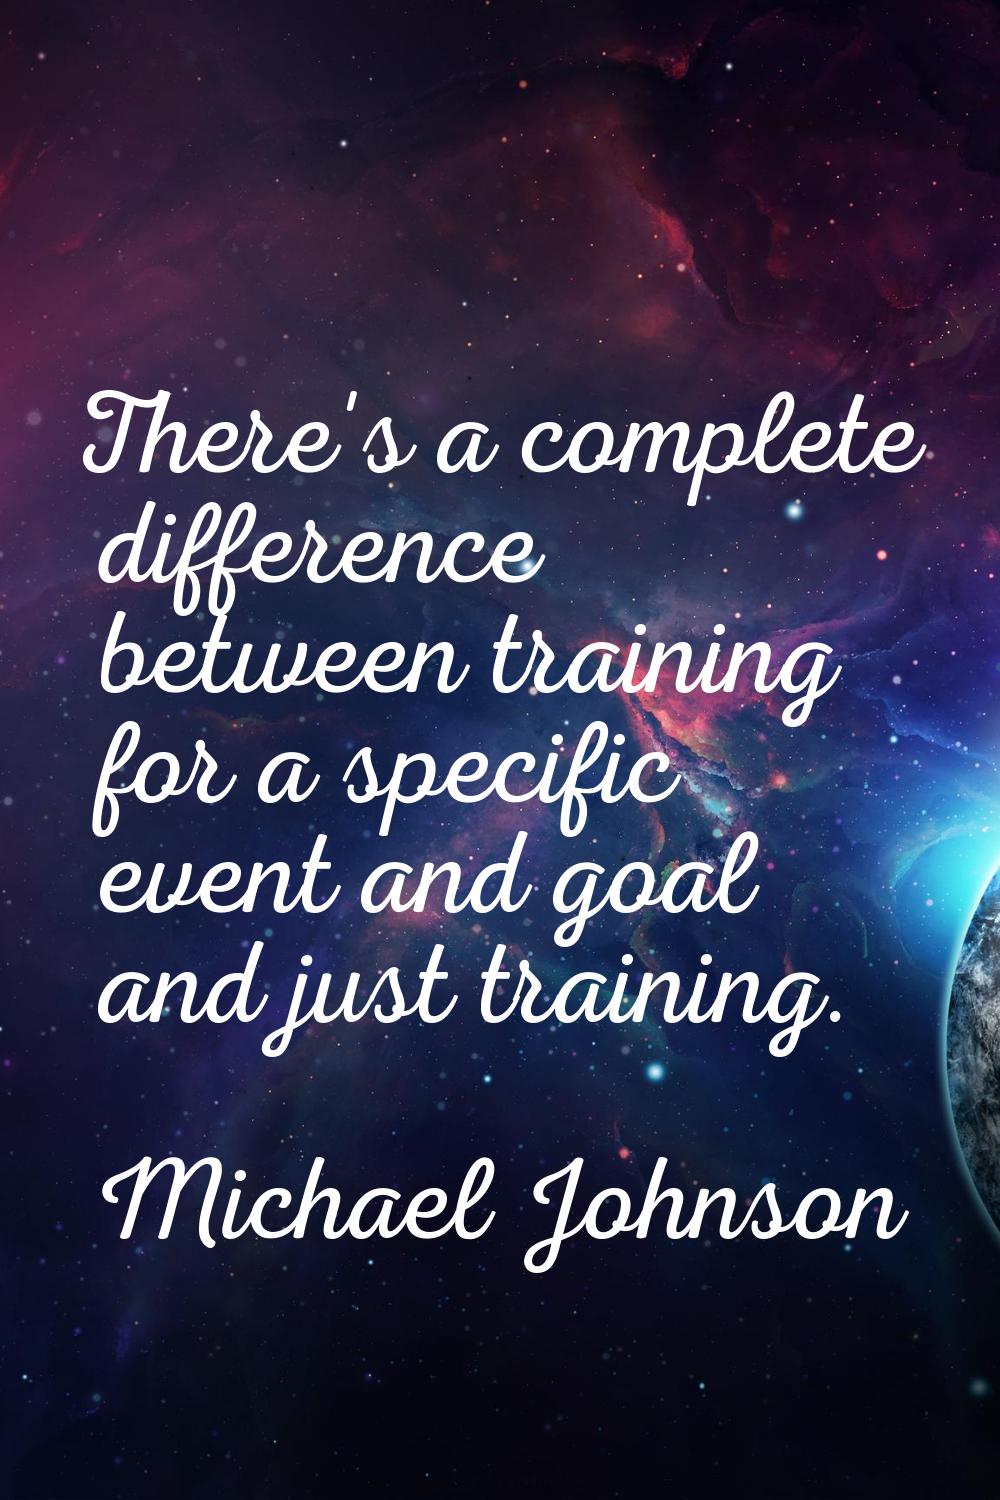 There's a complete difference between training for a specific event and goal and just training.